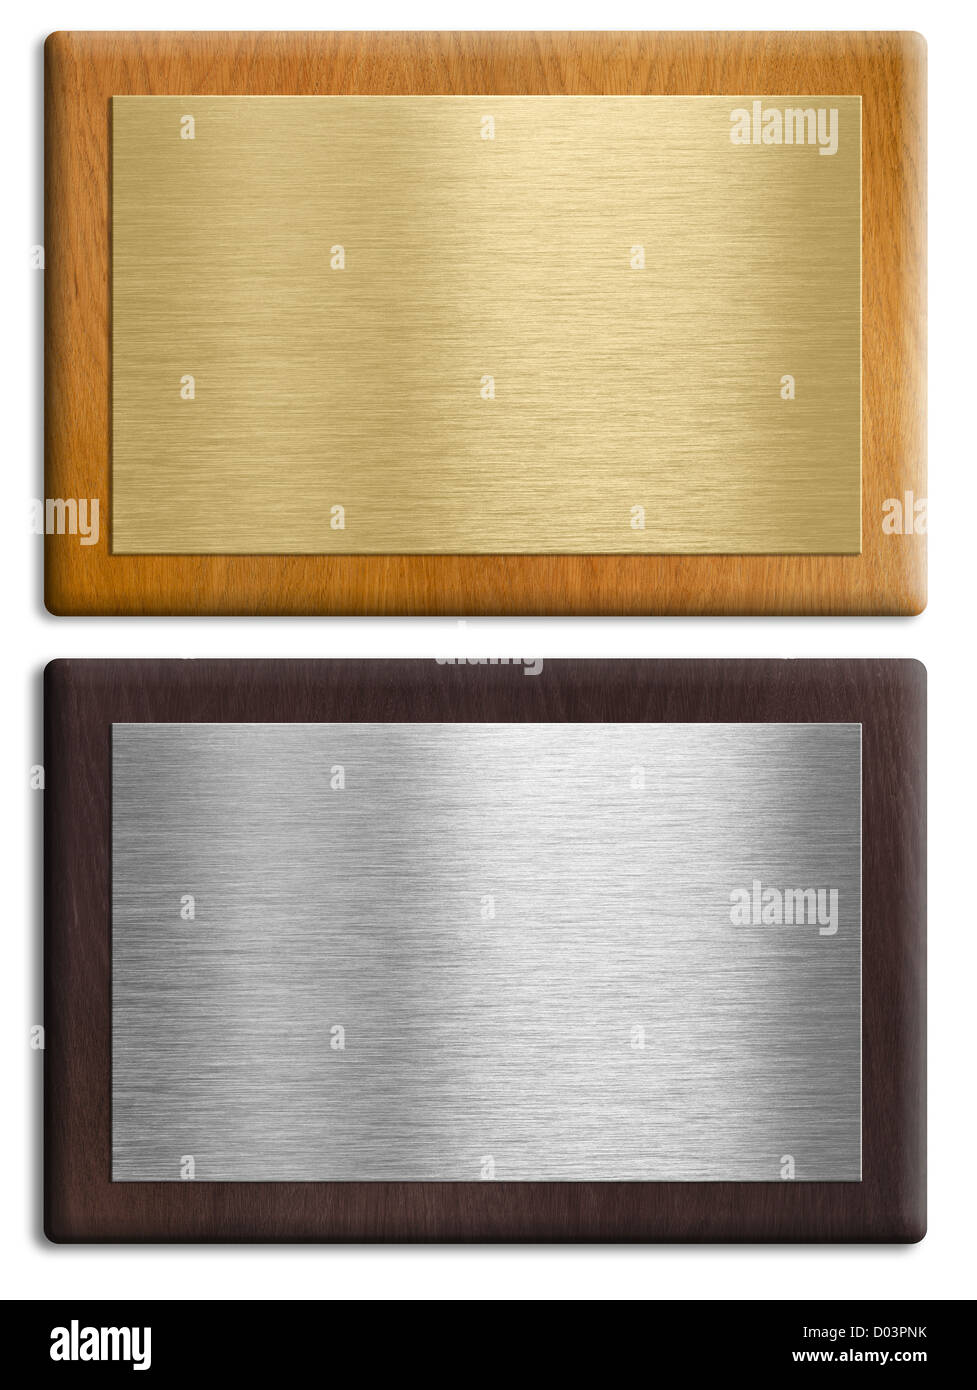 Silver and gold wooden plaques isolated on white set. Clipping paths are included. Stock Photo